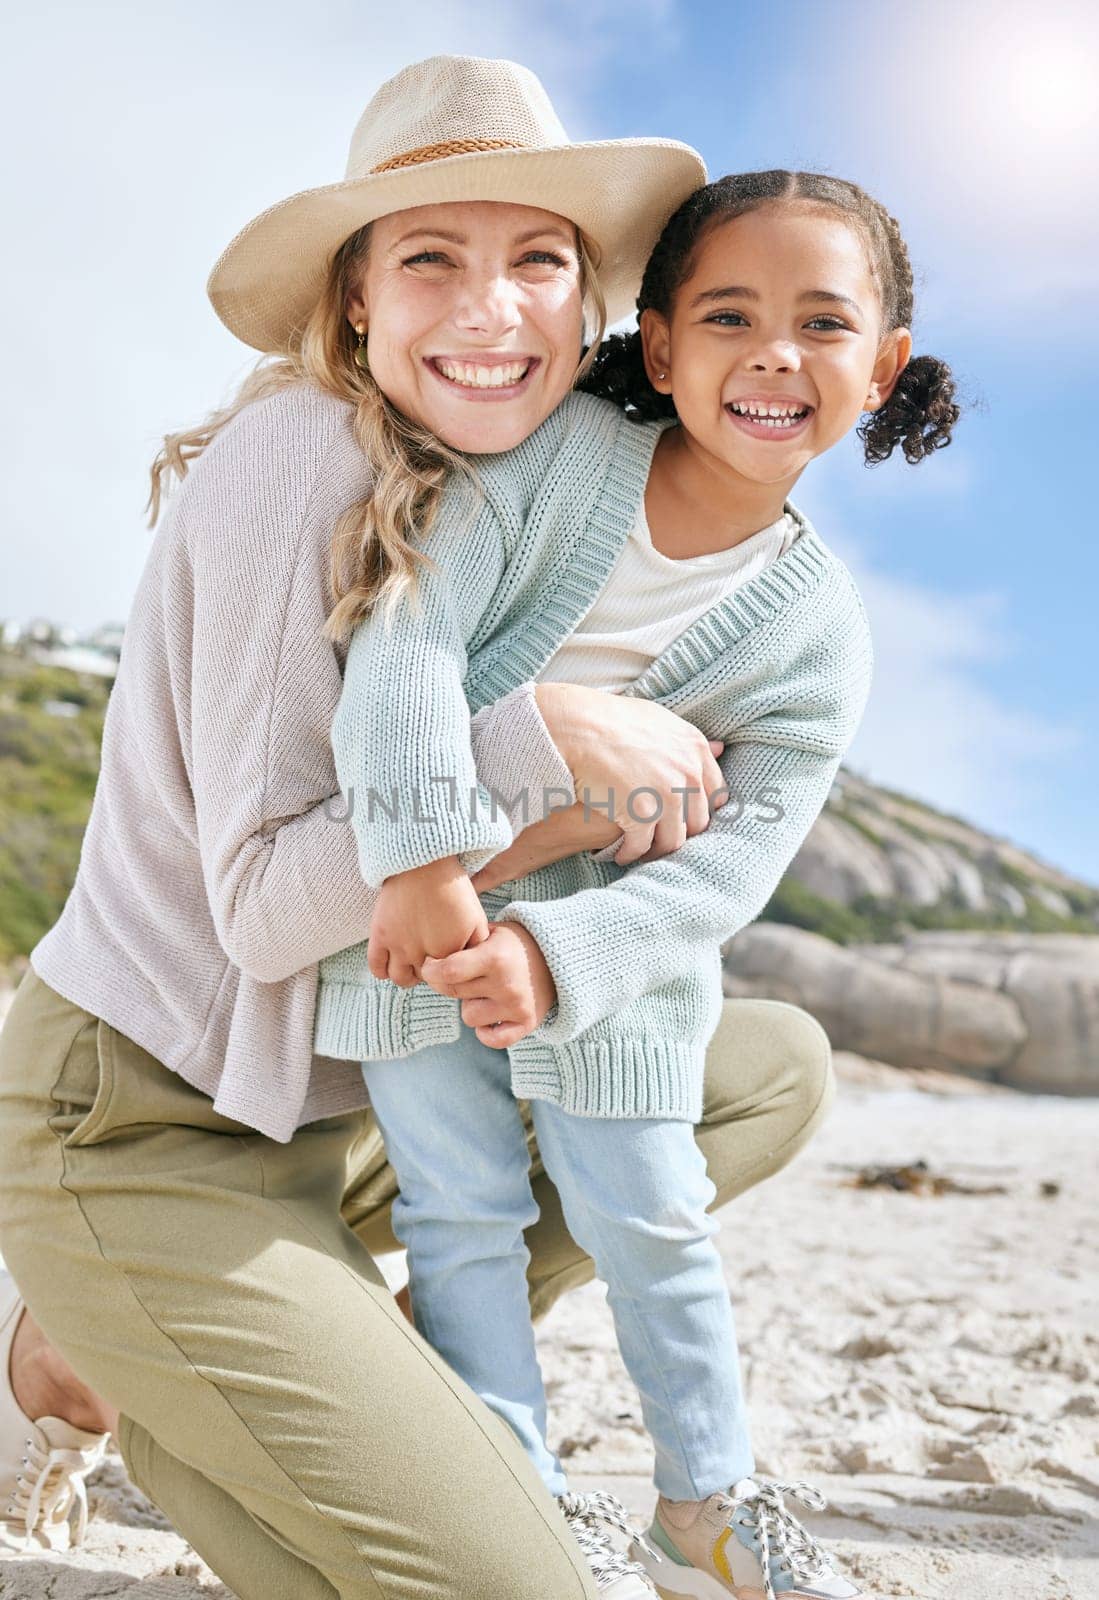 Hug, mother and child, together and on the beach, love and care, bonding in portrait for travel outdoor on the seaside. Happy, woman and girl, family and summer holiday, adventure and smile